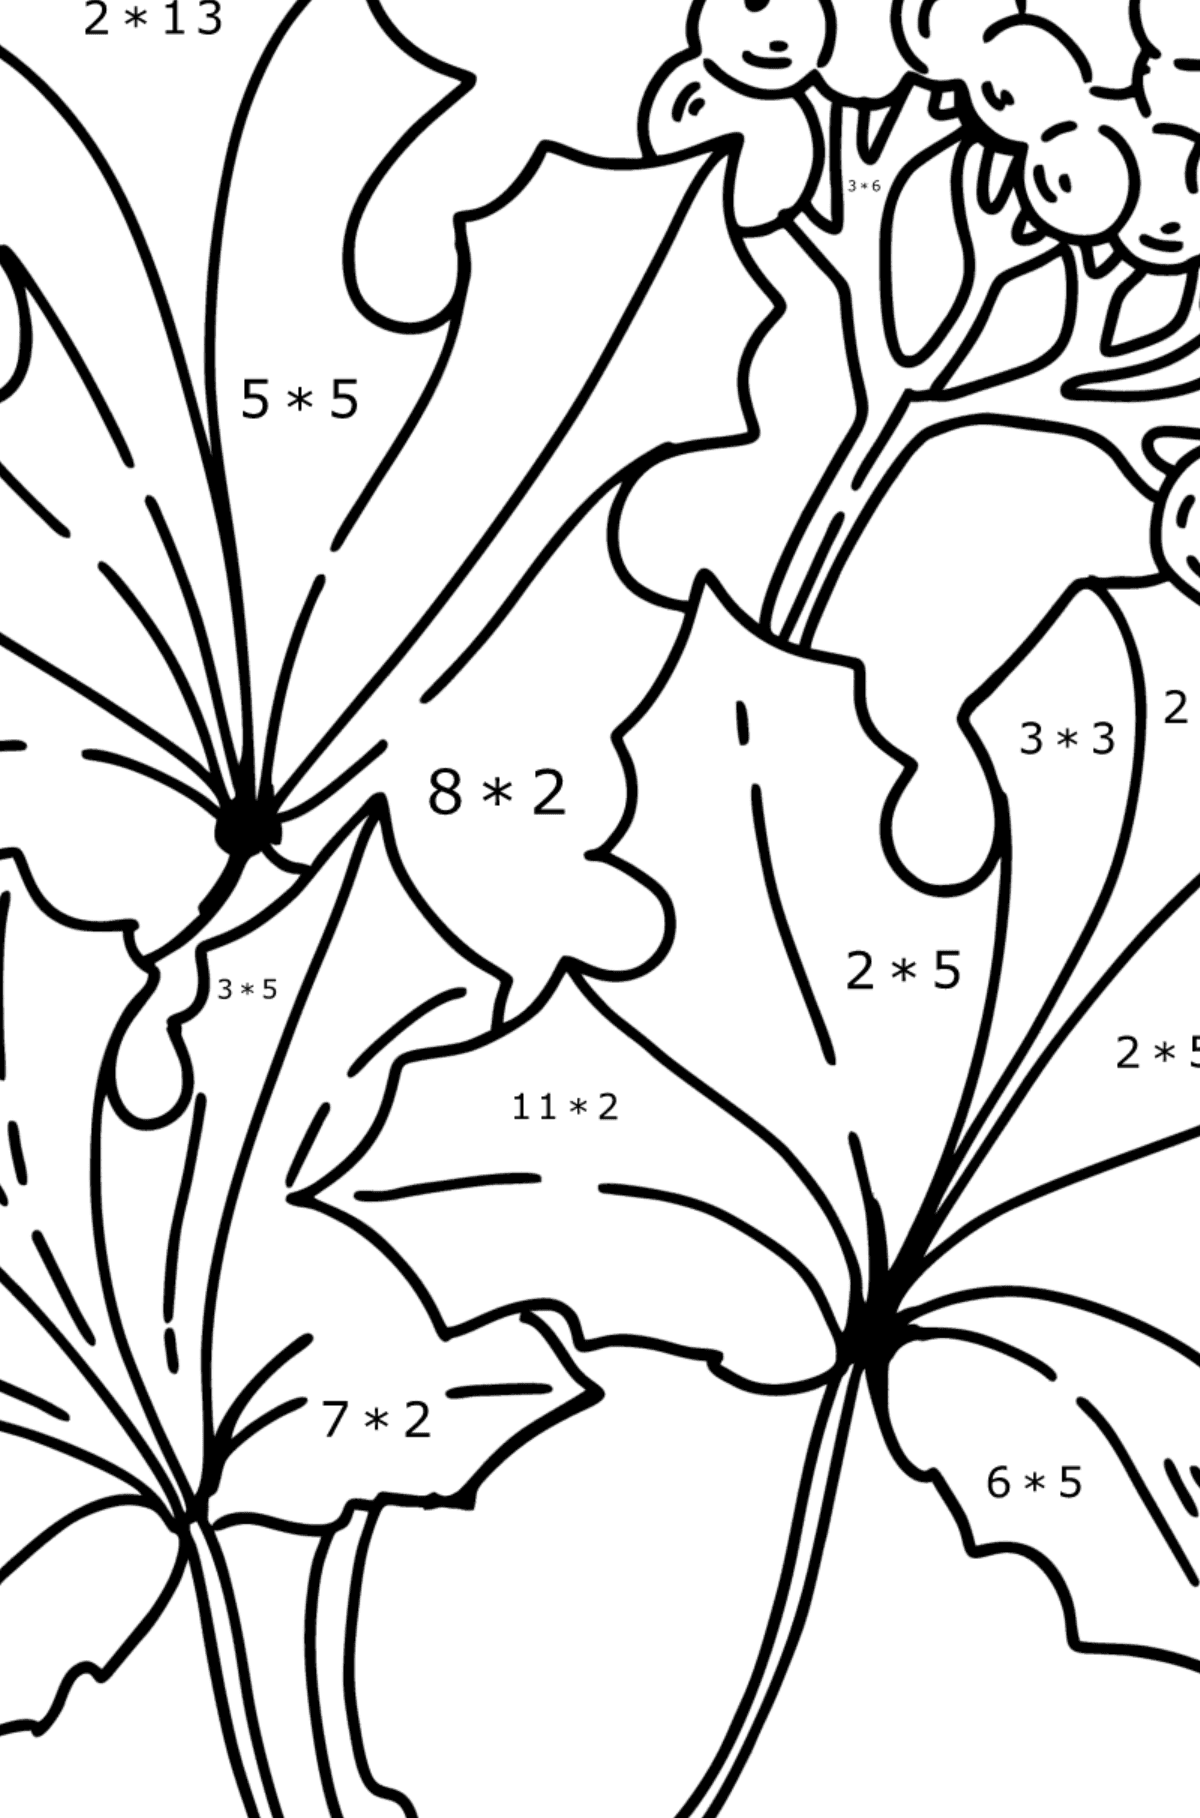 Coloring page - Maple Leaves and Elderberries - Math Coloring - Multiplication for Kids